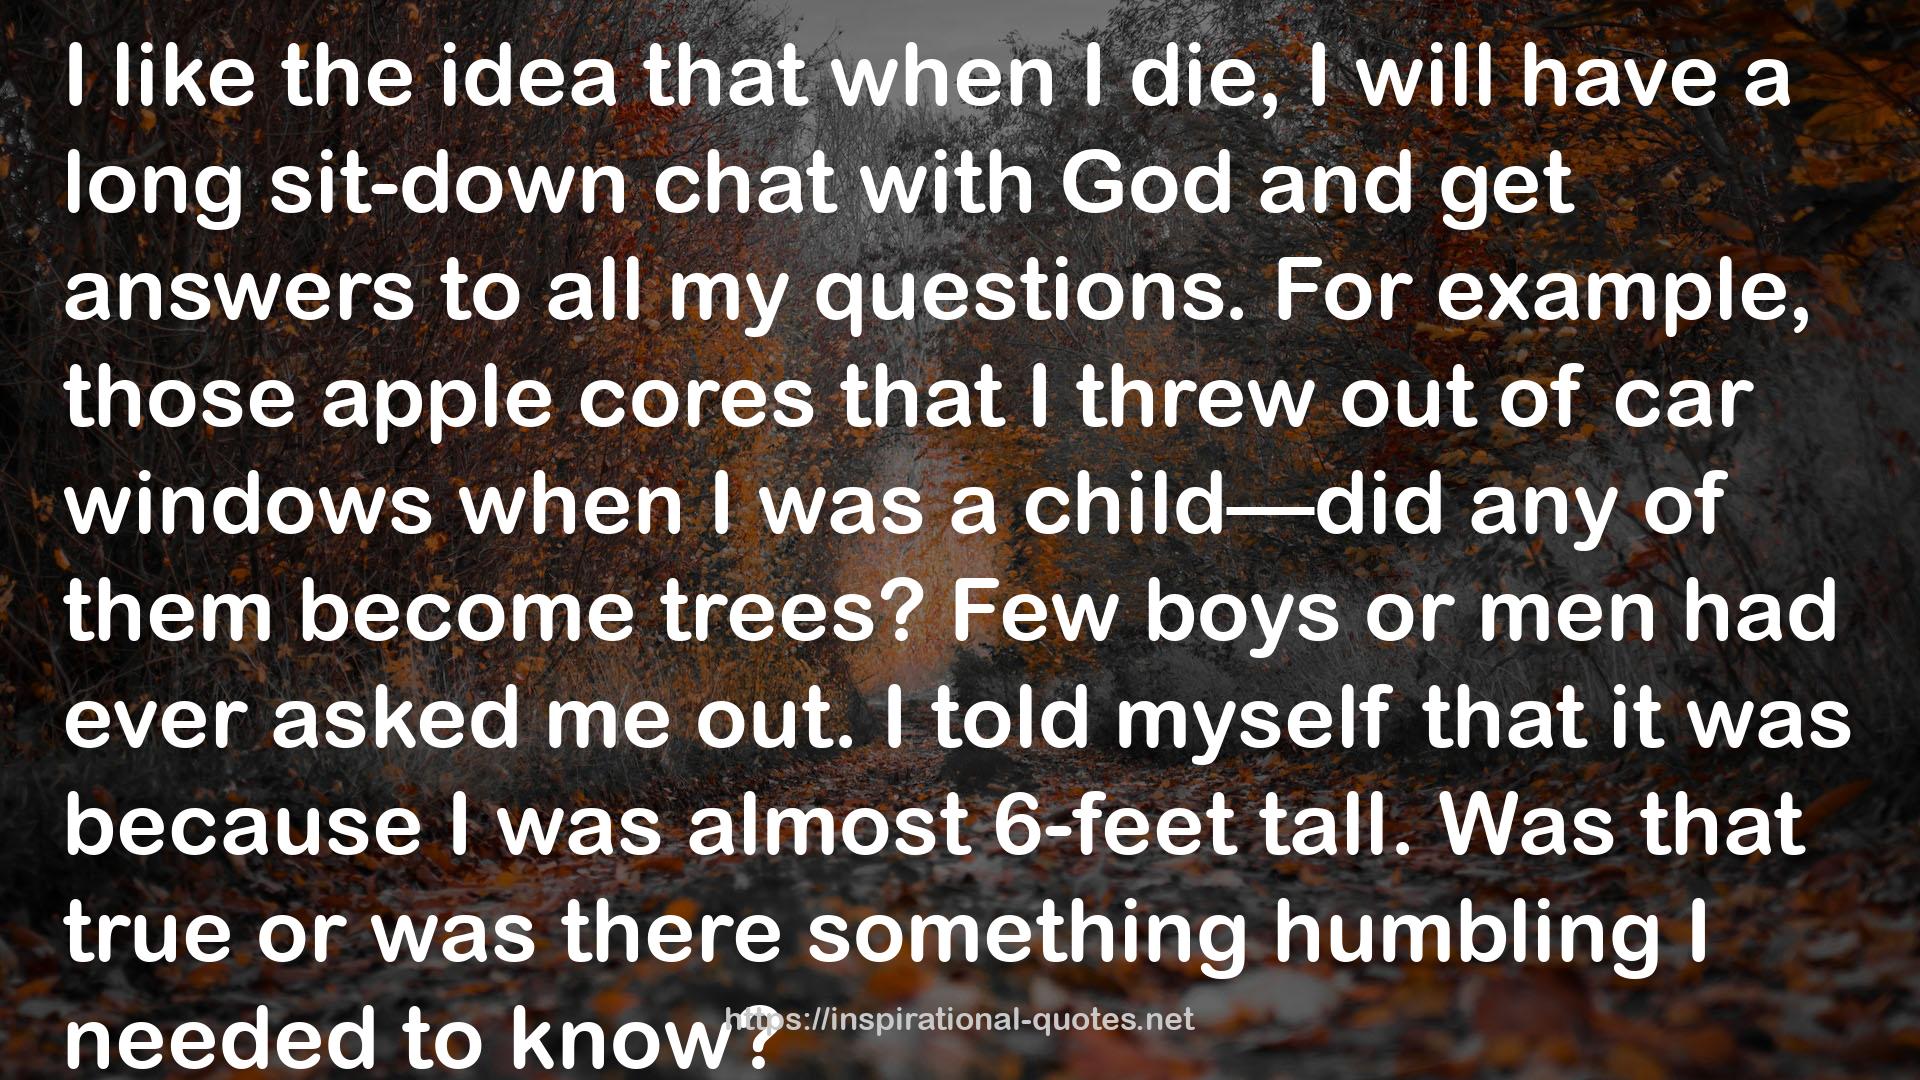 a long sit-down chat withGod  QUOTES